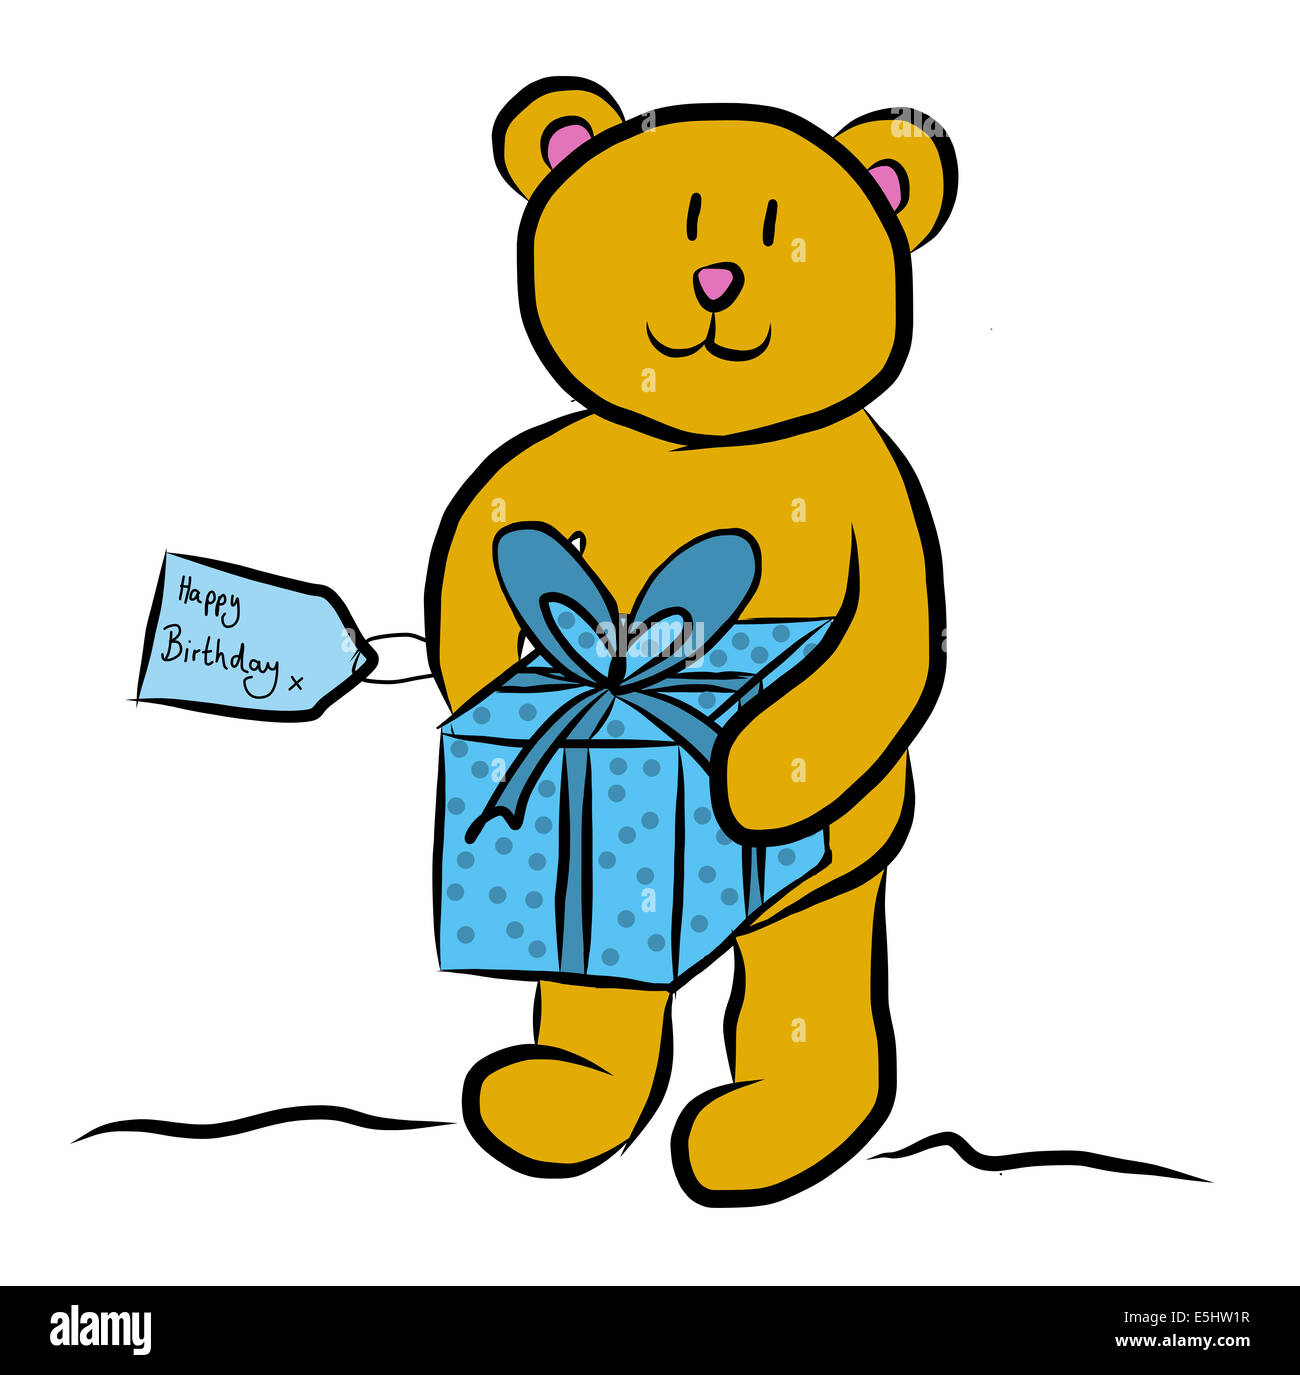 Illustration of a bear carrying a birthday present Stock Photo